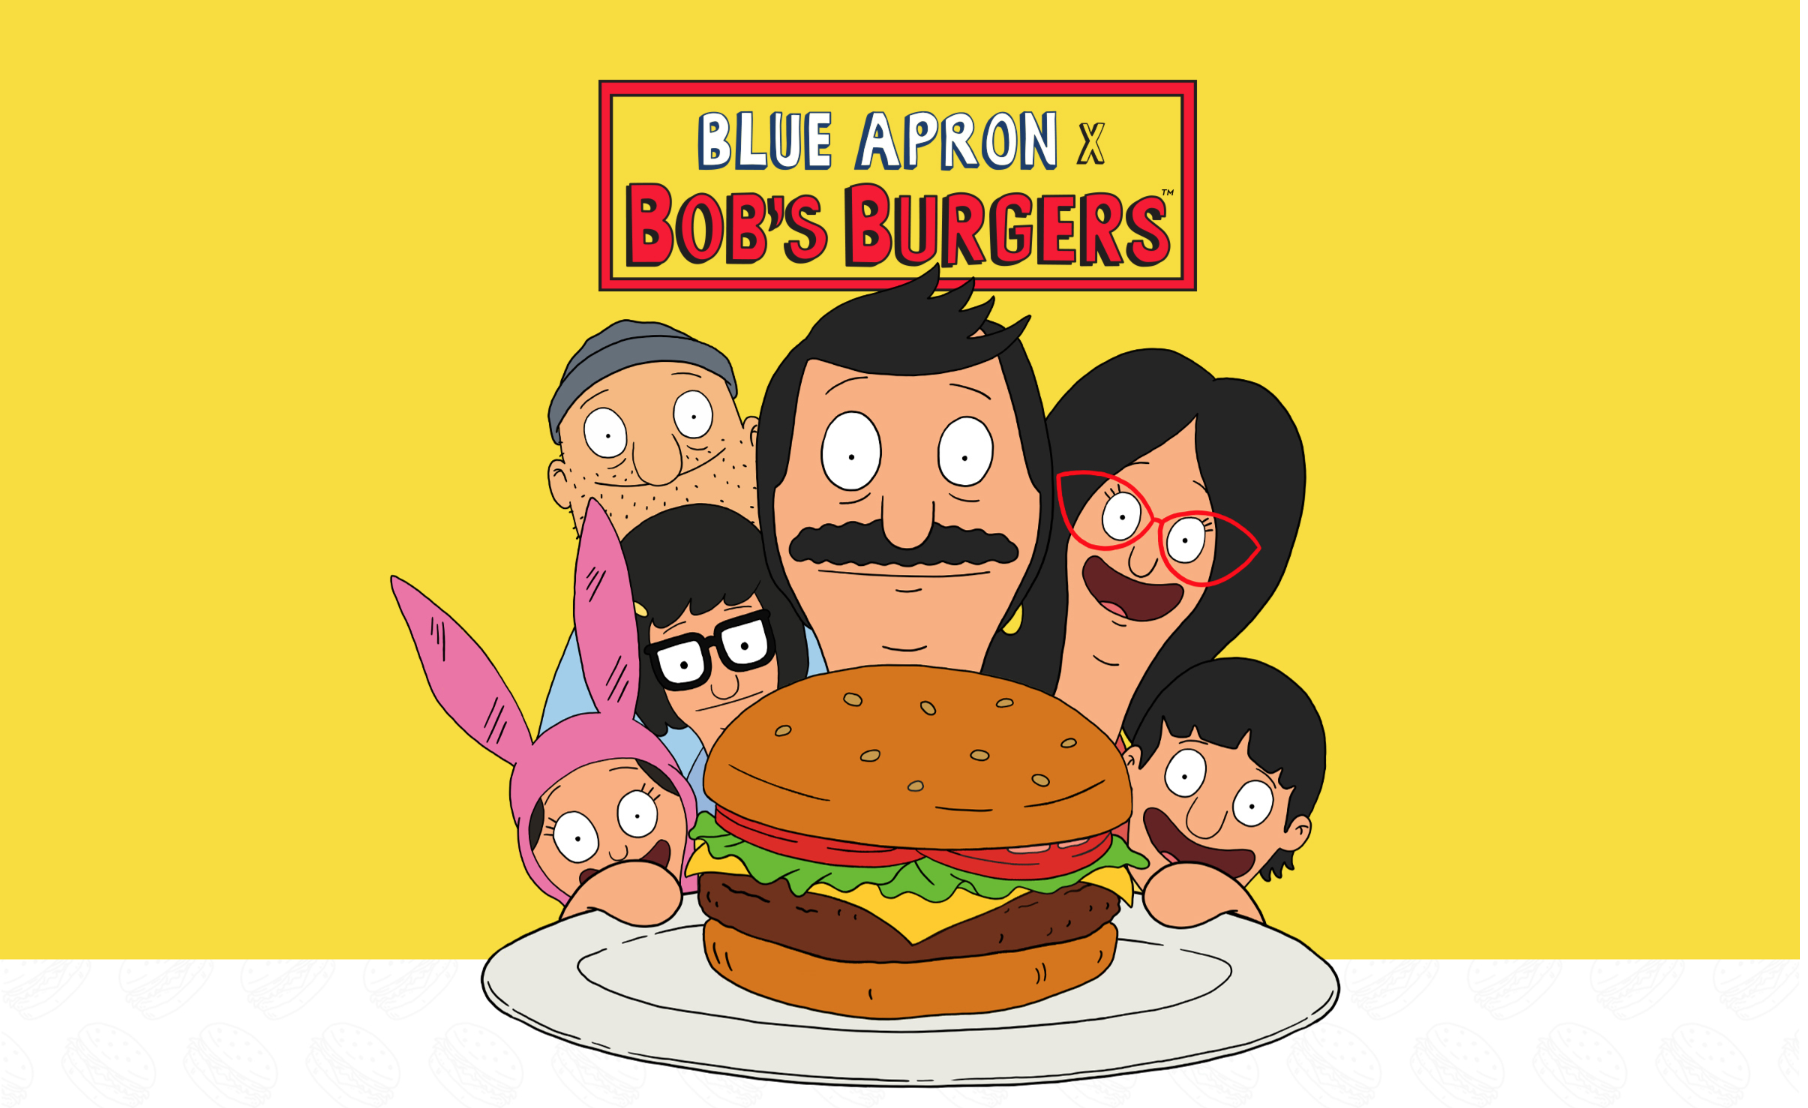 Bob’s Burgers X Blue Apron Recipes Available Now + $60 Off!